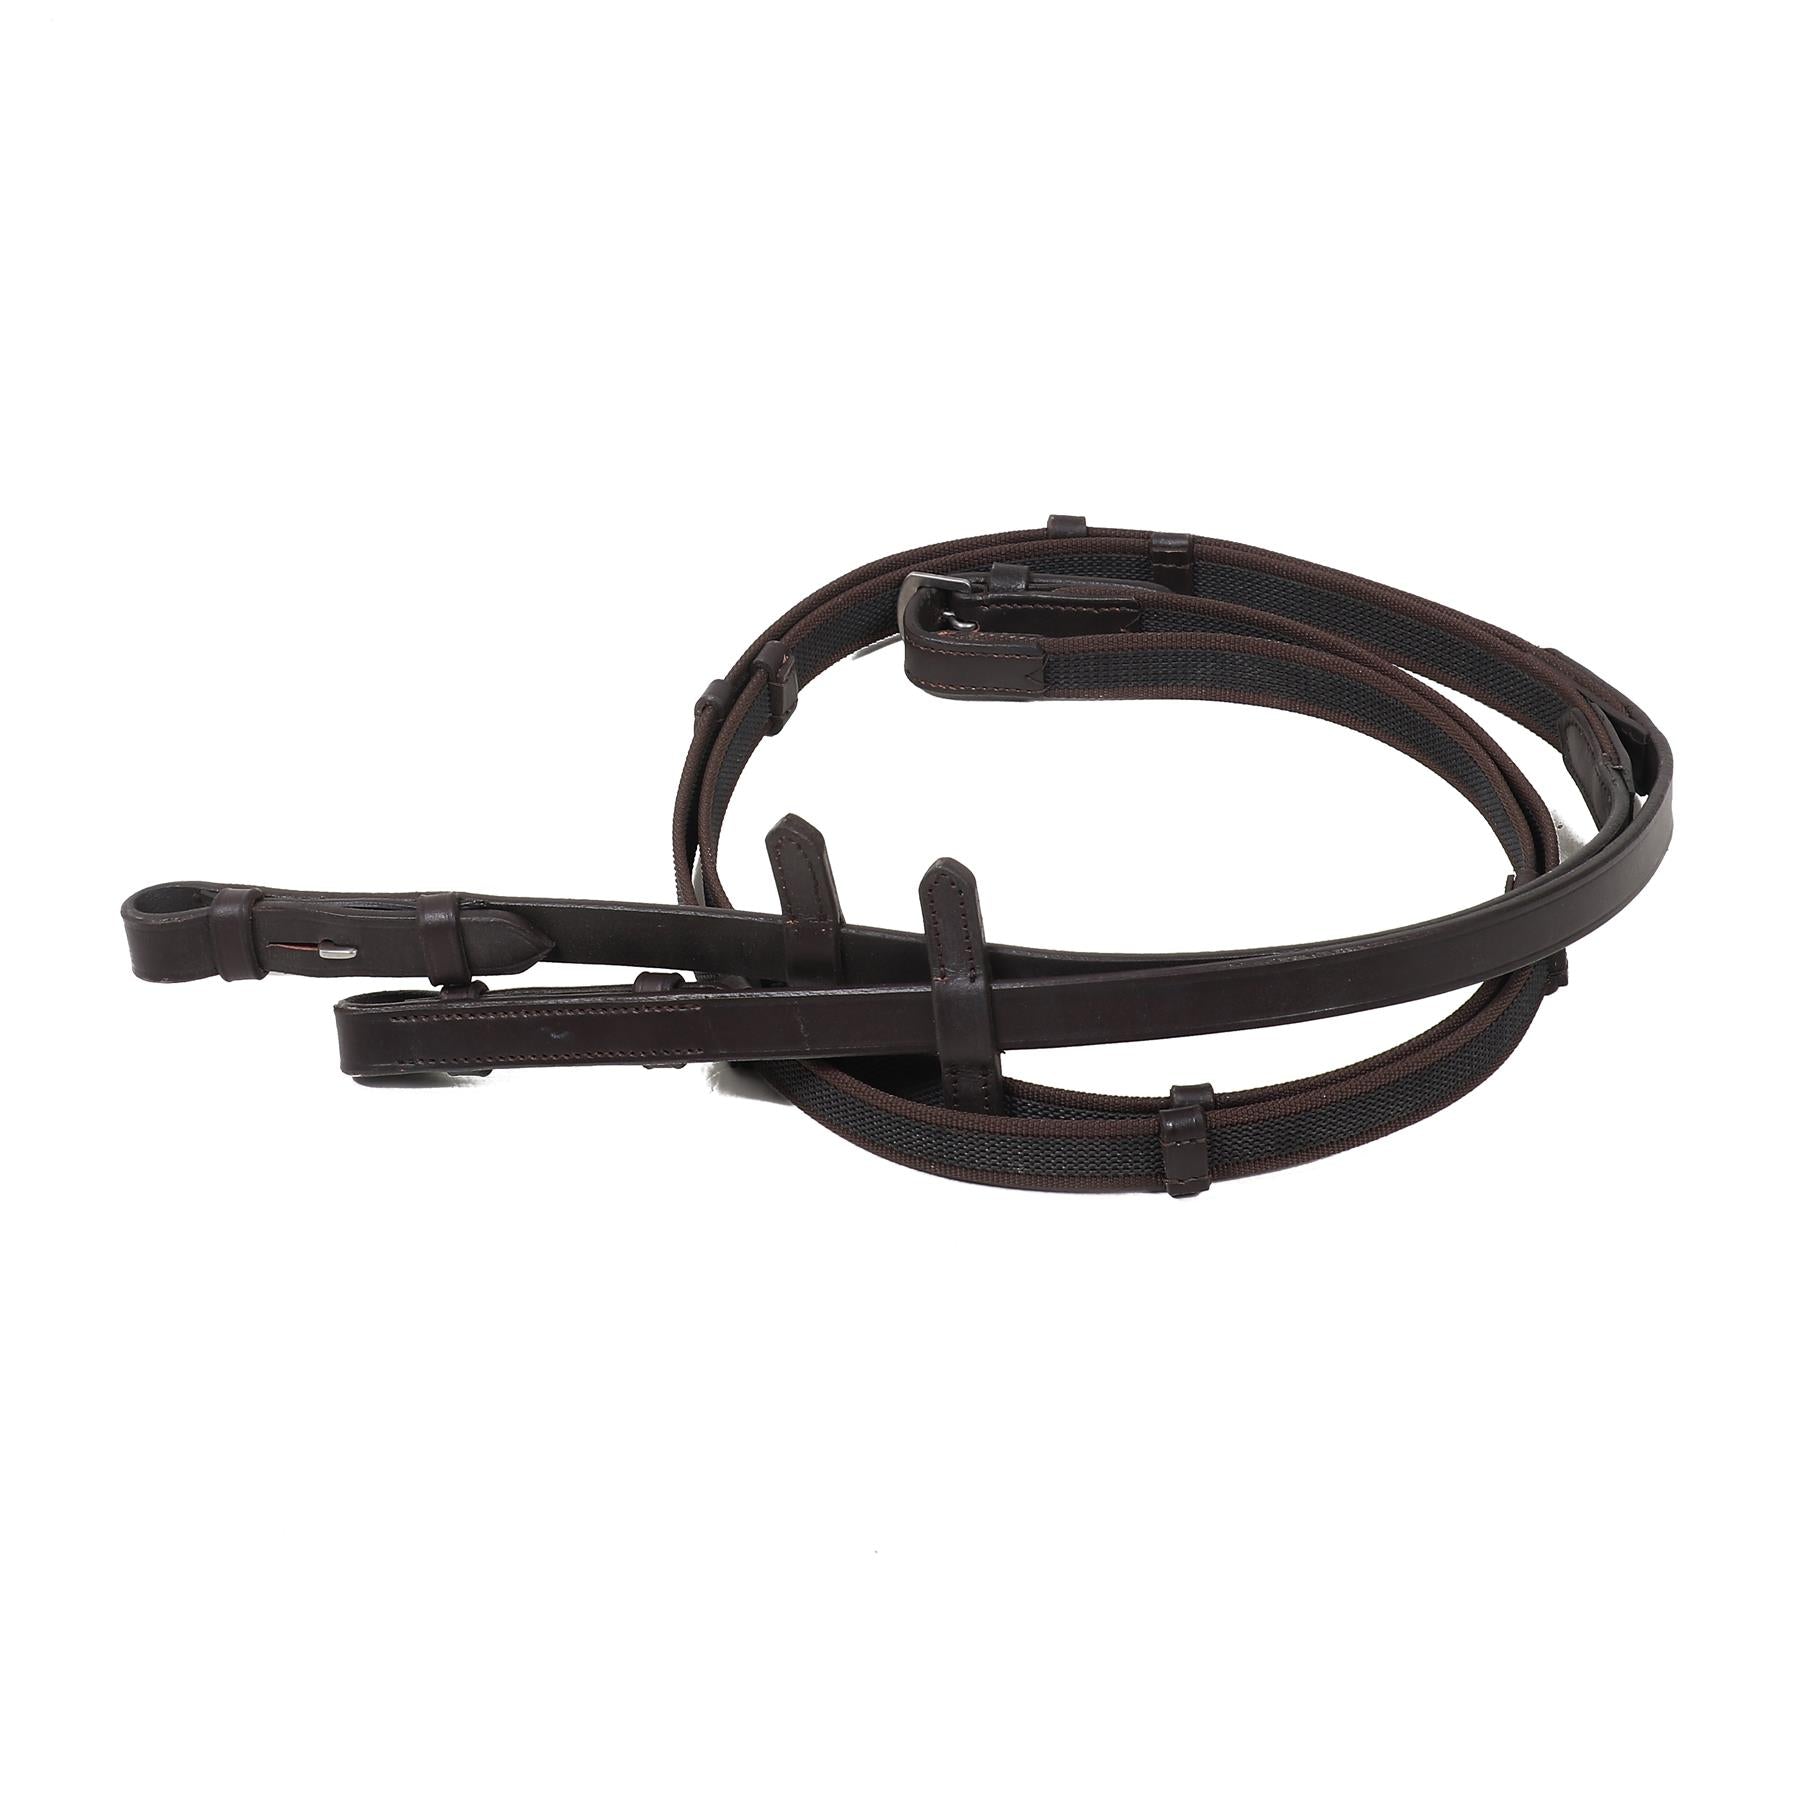 Super grip Leather Anti Slip Reins Continental Web Hand Stop Black Brown 3 Sizes - Tack24